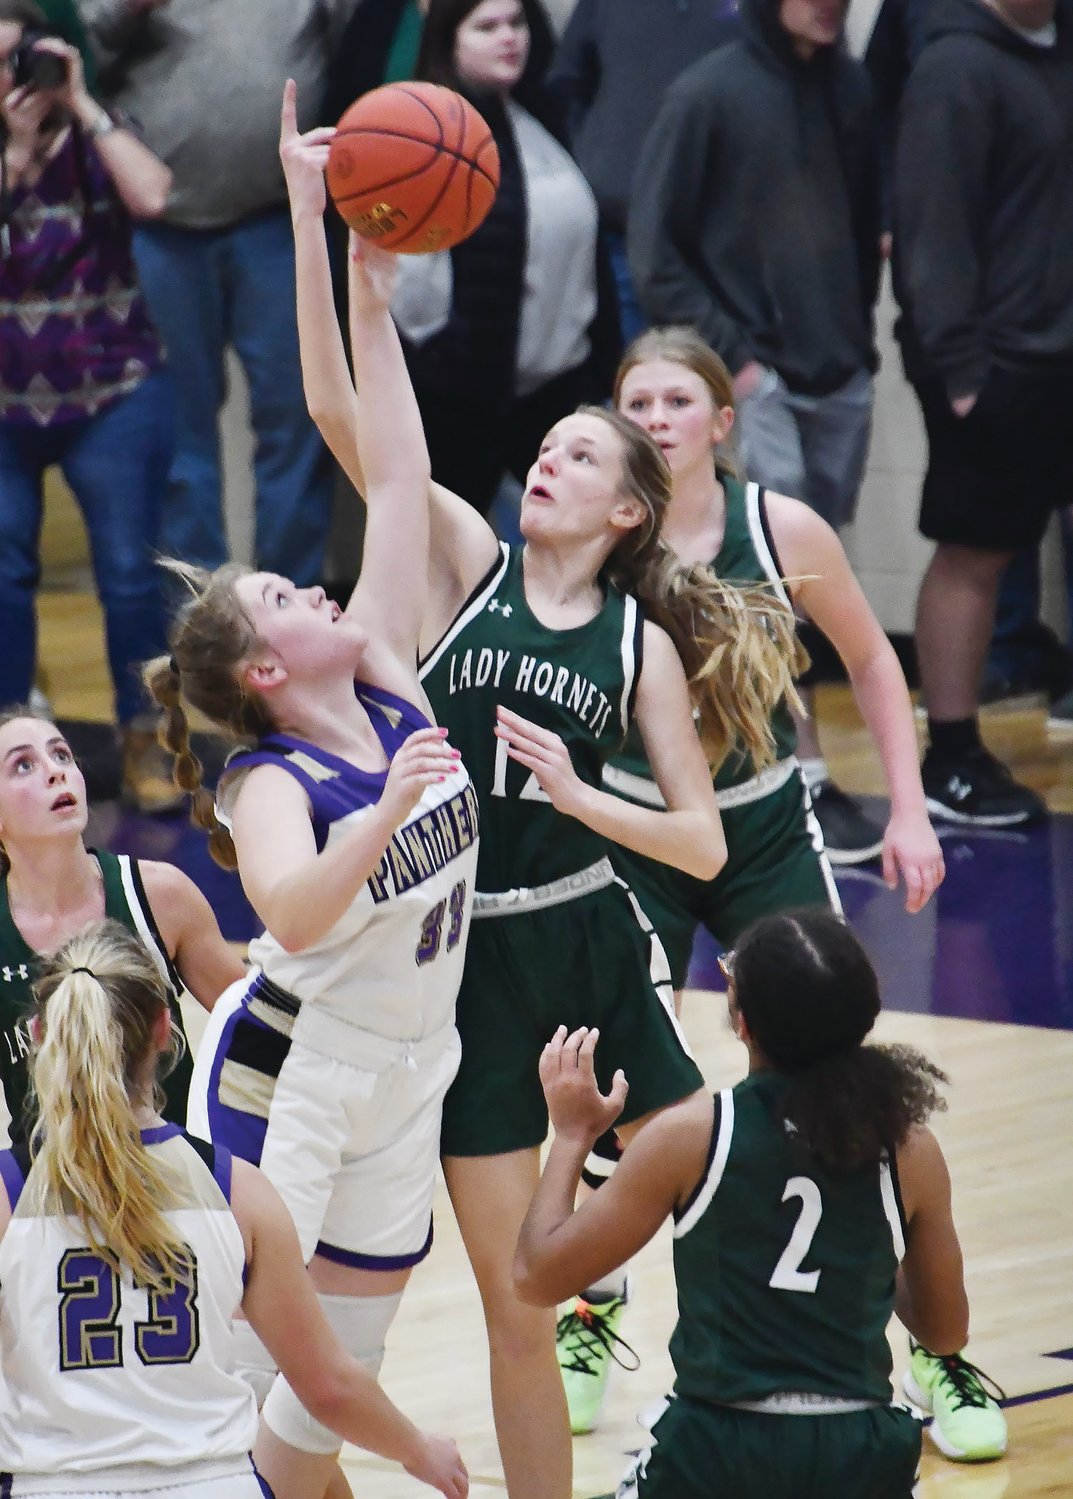 Westran High School girls' basketball player Emma Wortmann (12) vies for control of the ball with Julia Sloan (33) of Salisbury during Friday's Lewis & Clark Conference game. The Panthers topped the Hornets 53-48 at The Dome.